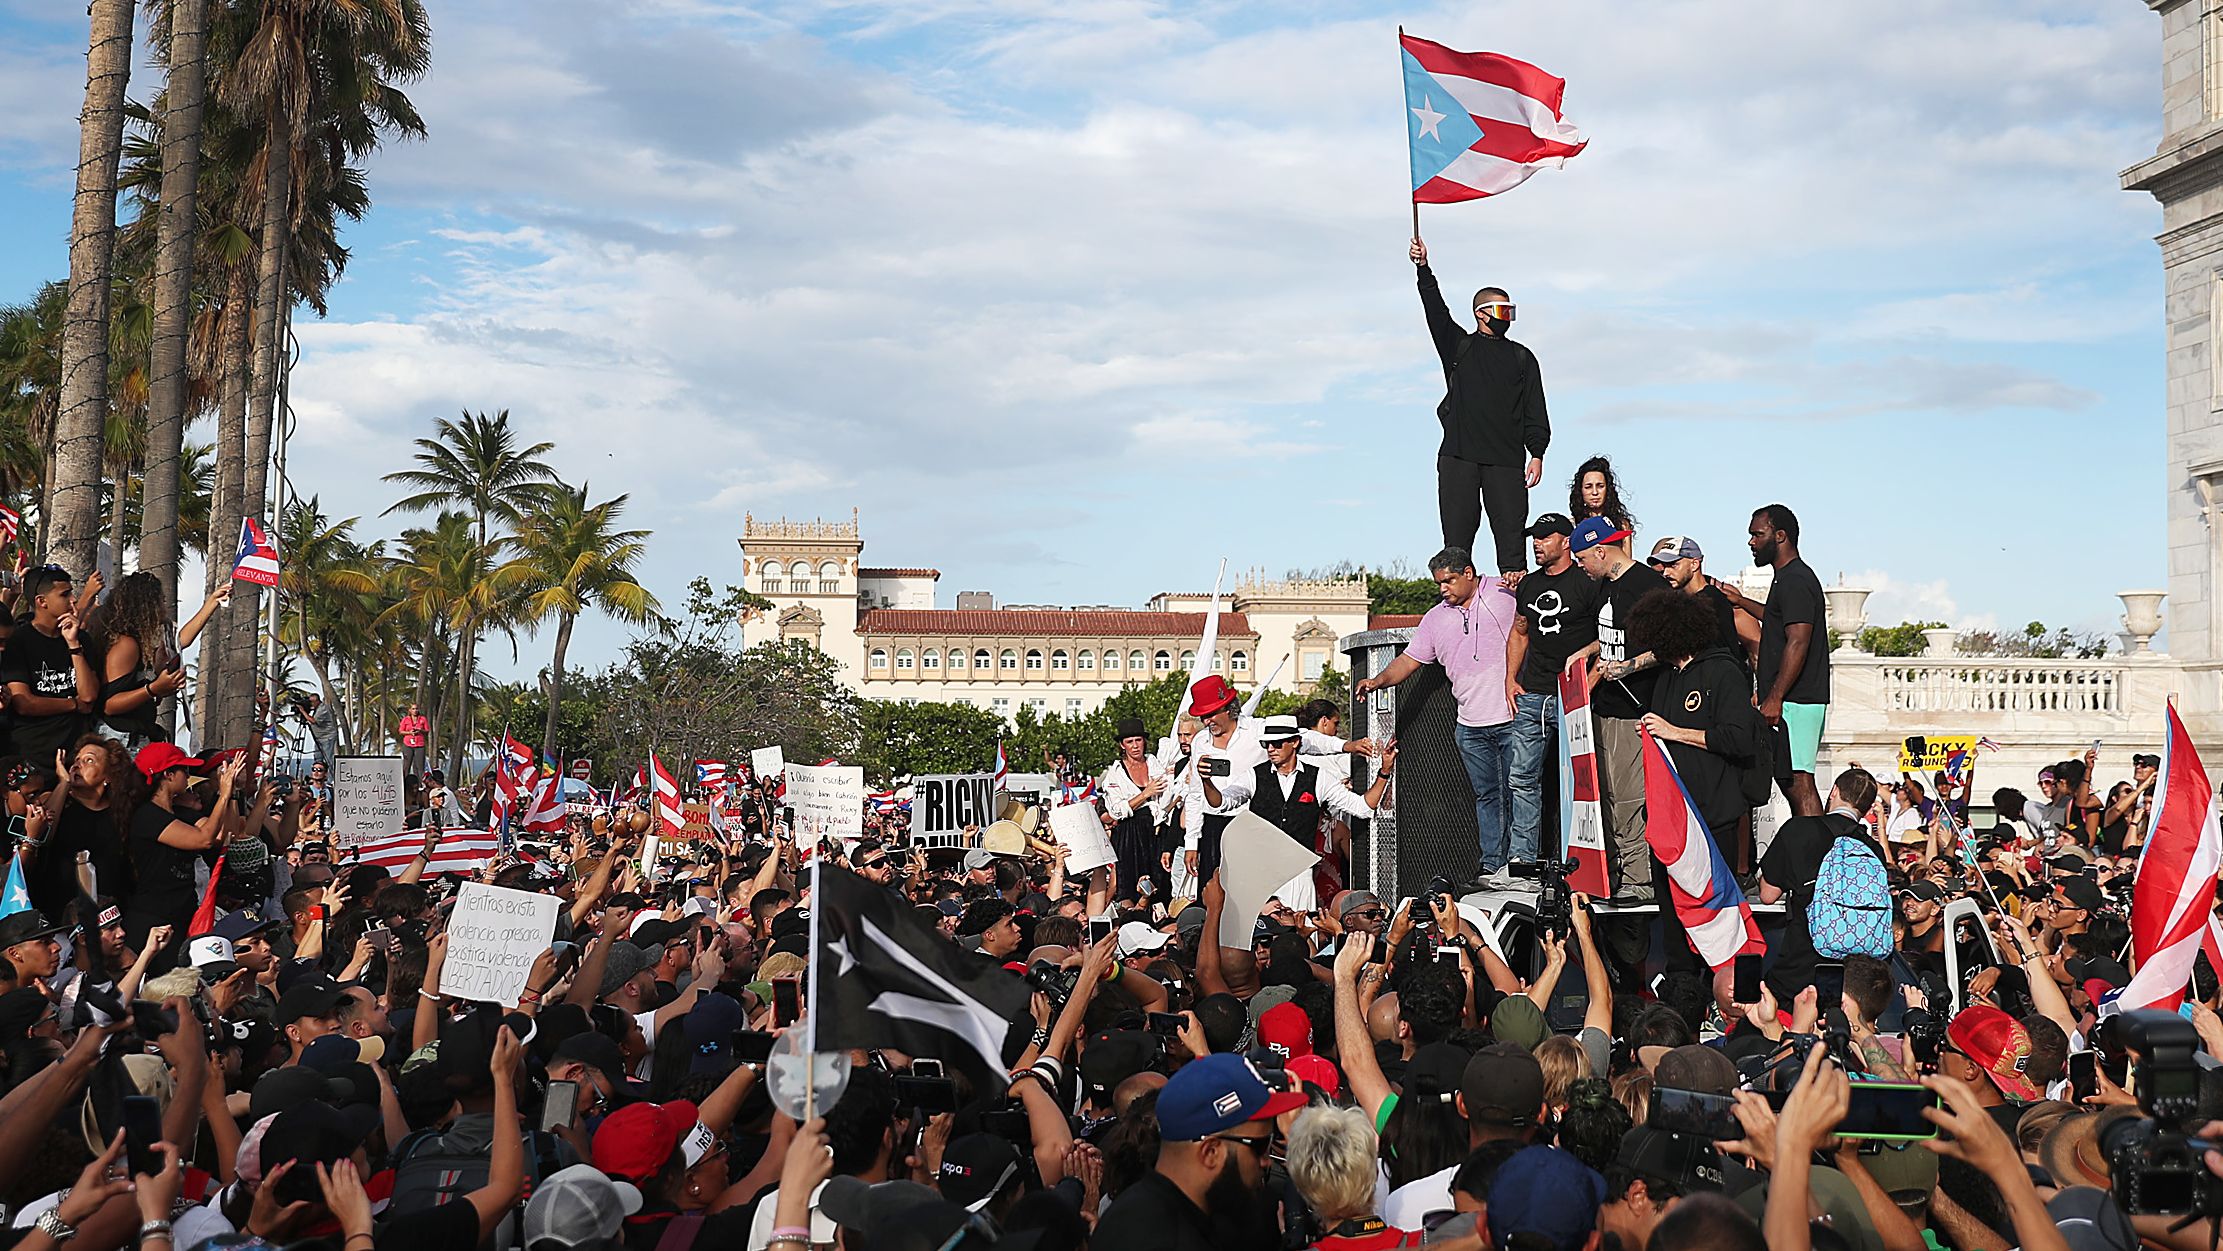 Bad Bunny (holding flag), Ricky Martin (black hat) and Residente (blue hat) join demonstrators protesting against Ricardo Rosselló, the then-governor of Puerto Rico, who was ousted after massive protests in Puerto Rico in 2019.